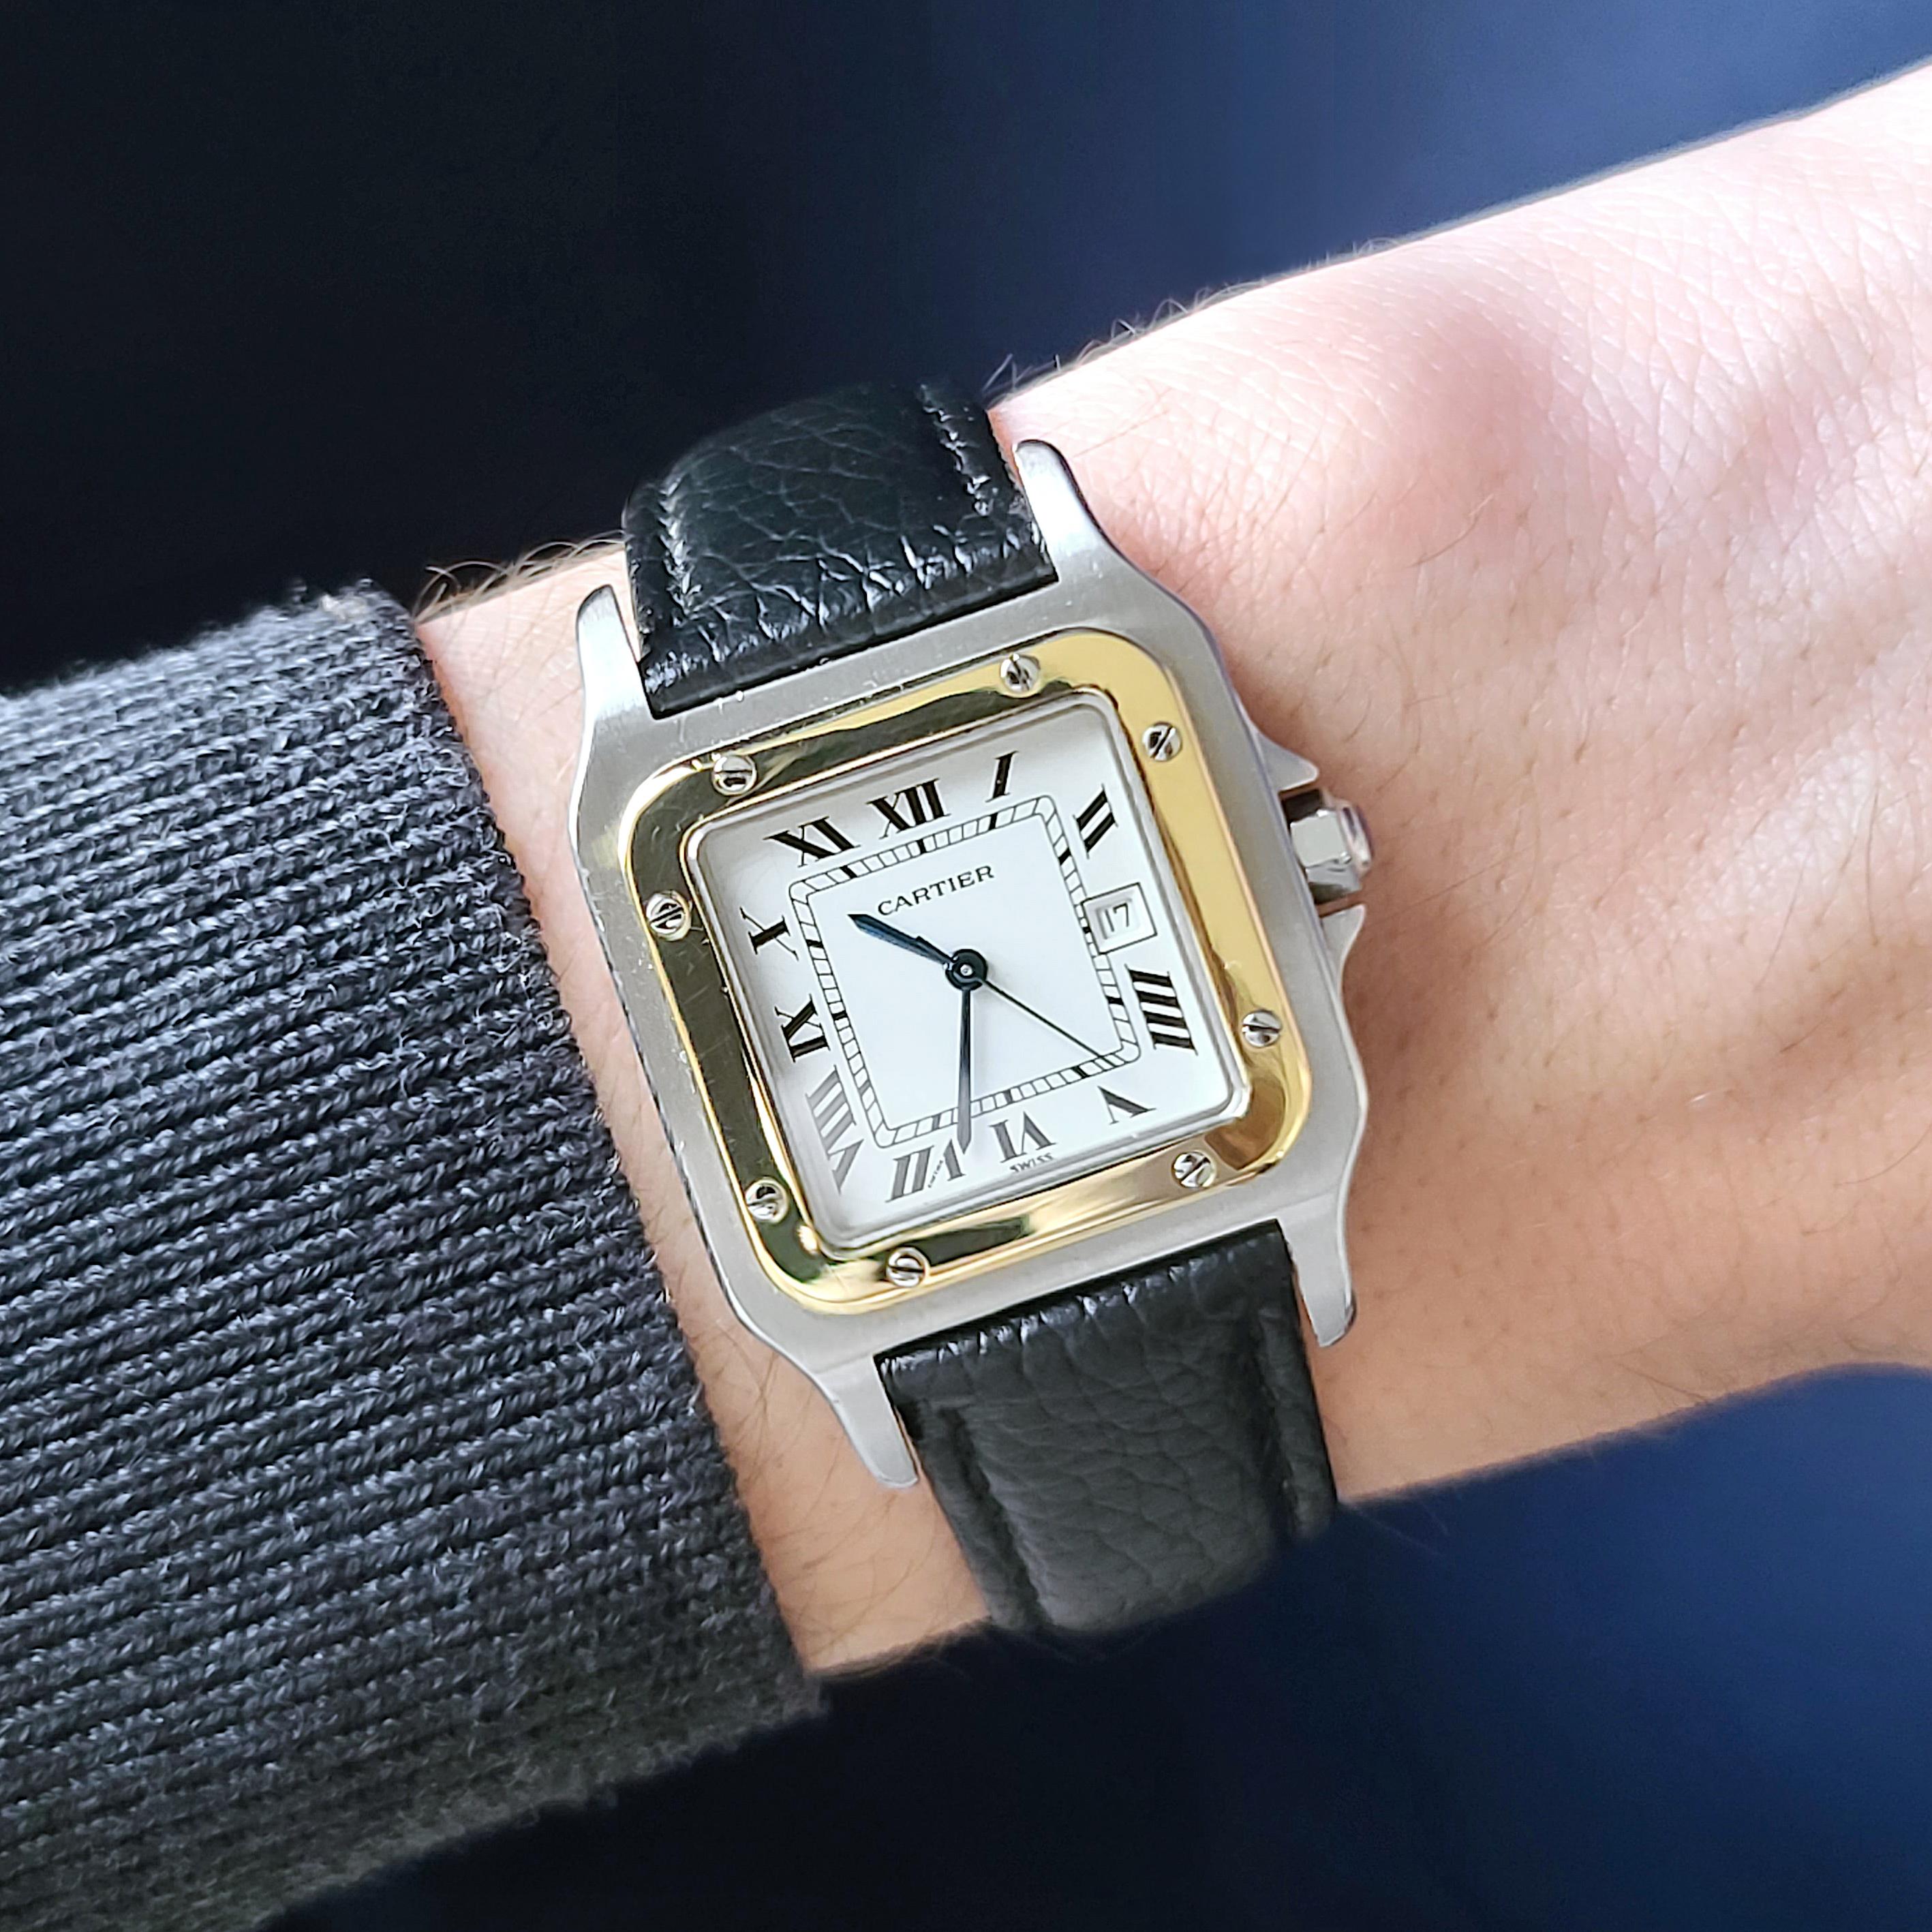 CARTIER
Founded in 1847

For the discerning ones

Wear Cartier watch it's integrate the club of famous clients : Jackie Kennedy, Princess Diana, the Duchess of Windsor, Princess Grace, Barbara Hutton, Elizabeth Taylor, Andy Warhol, Yves Saint